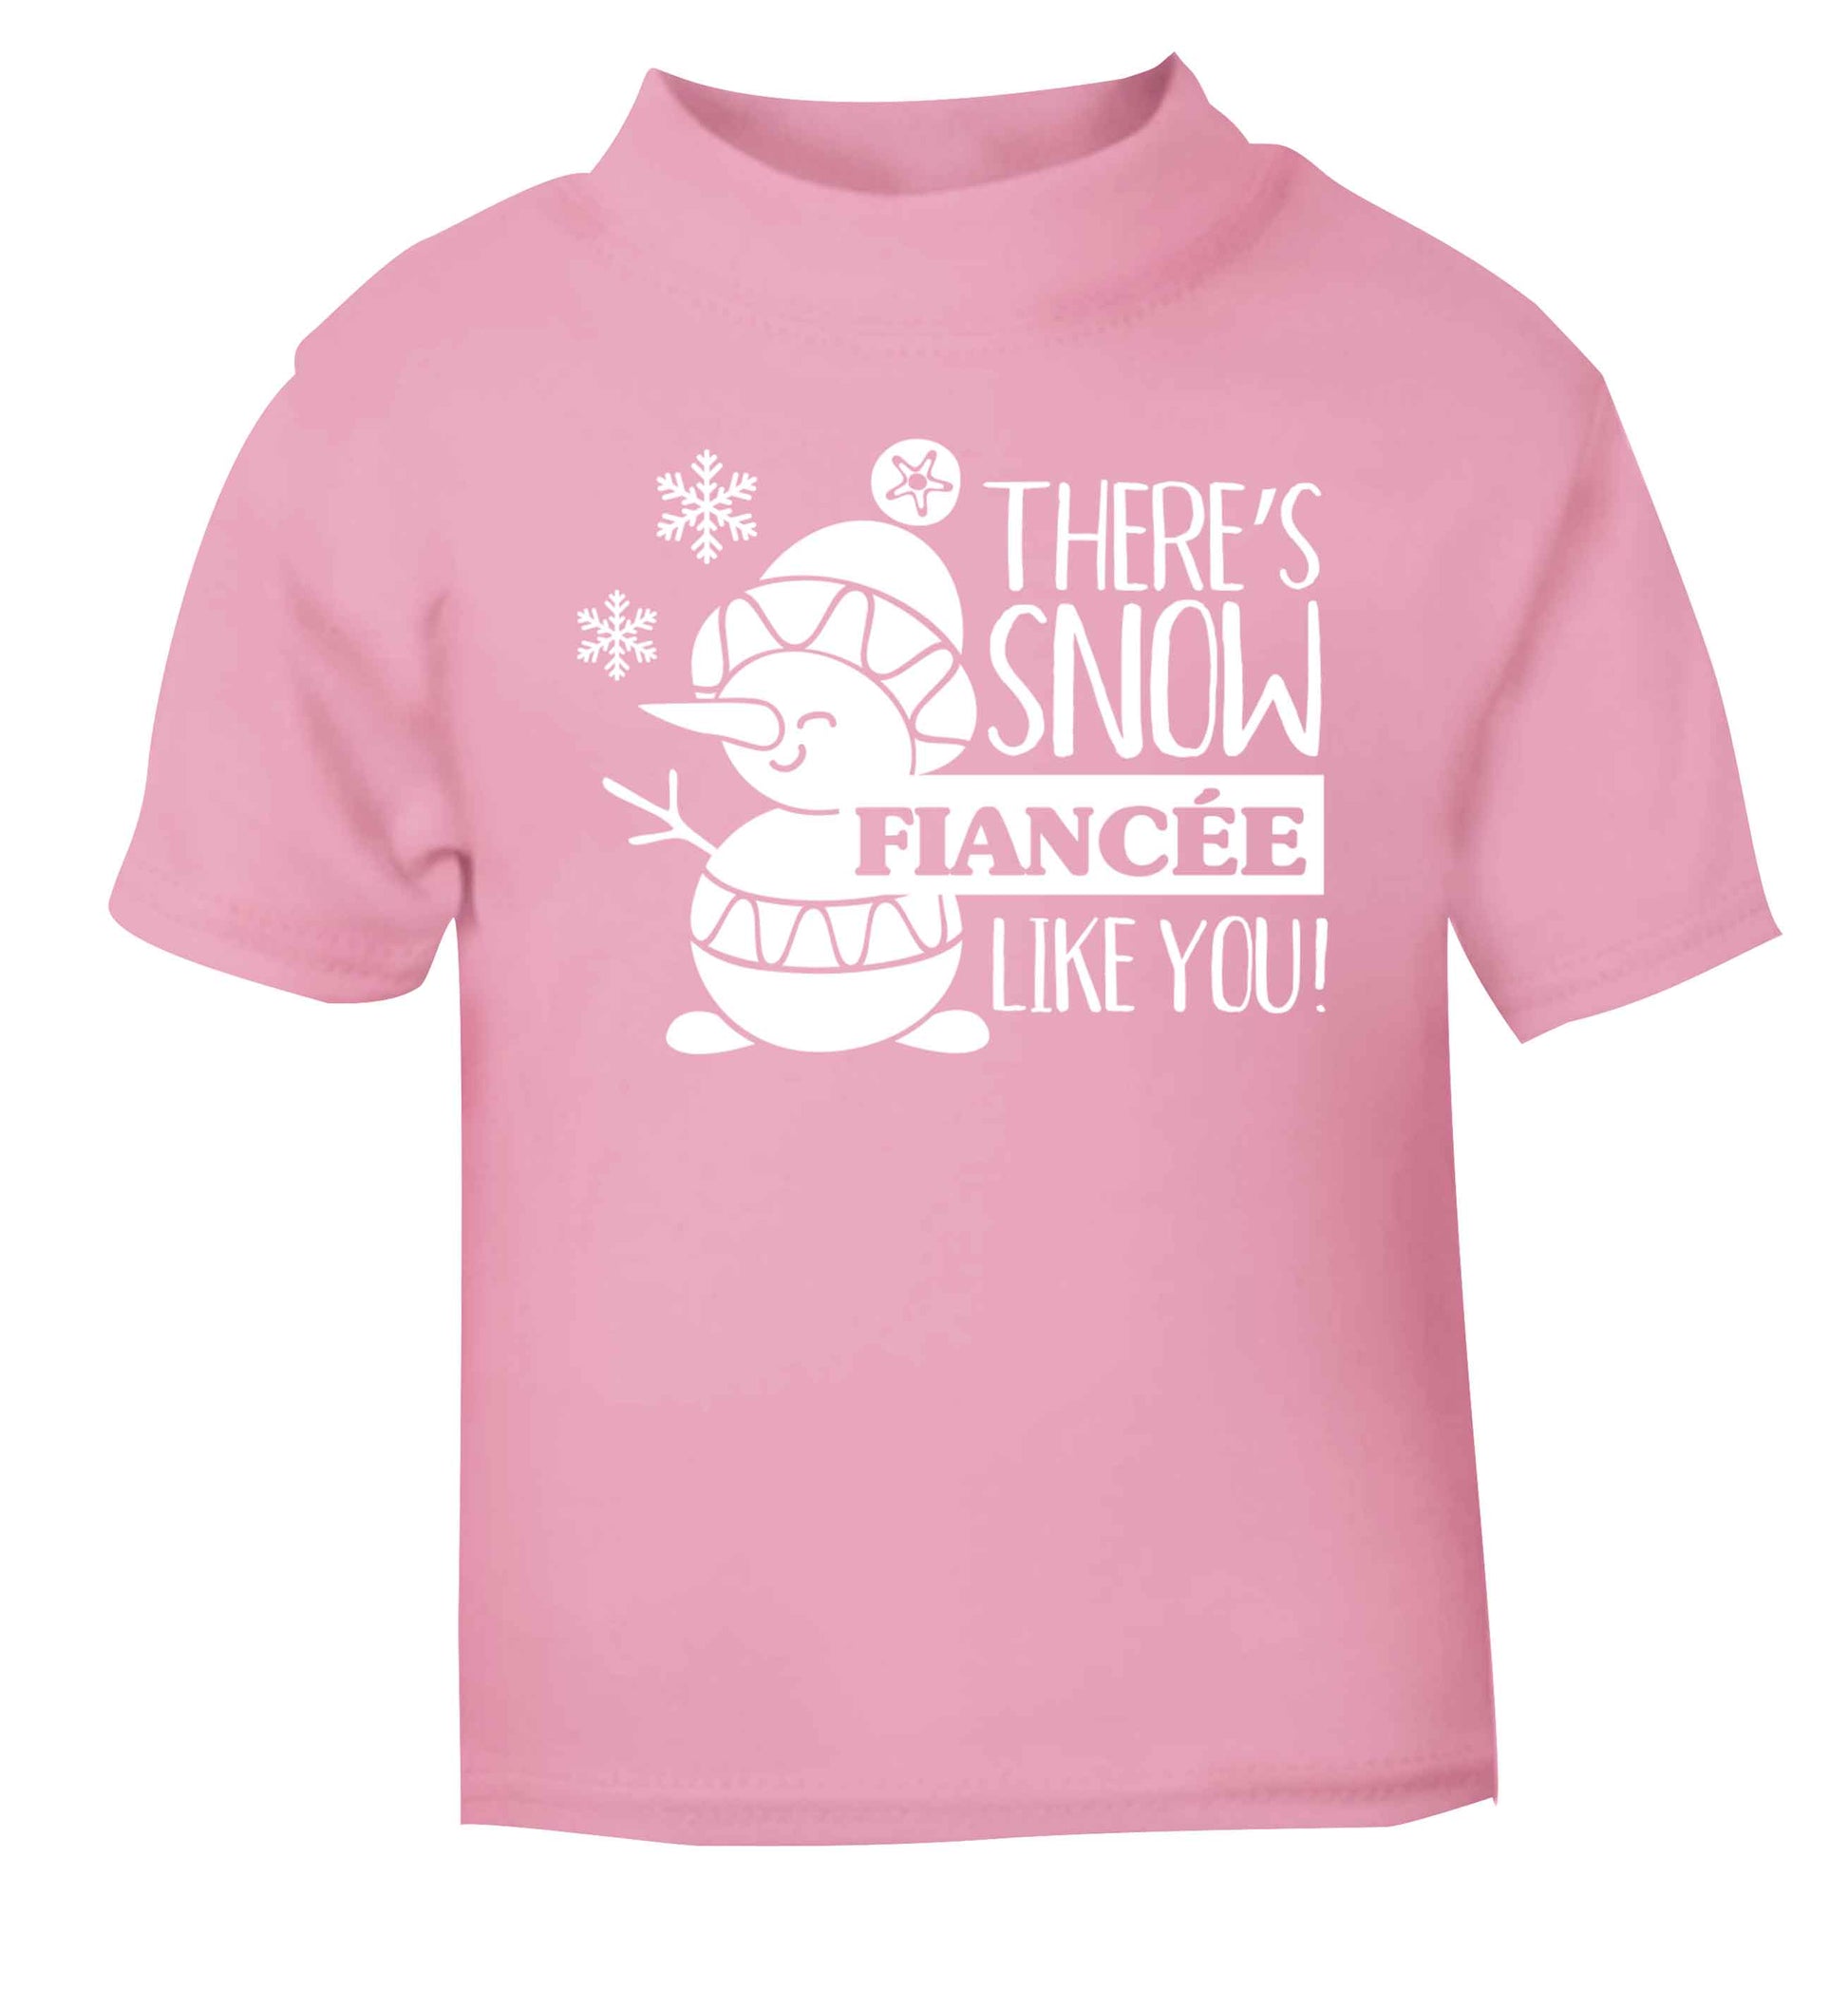 There's snow fiancee like you light pink baby toddler Tshirt 2 Years